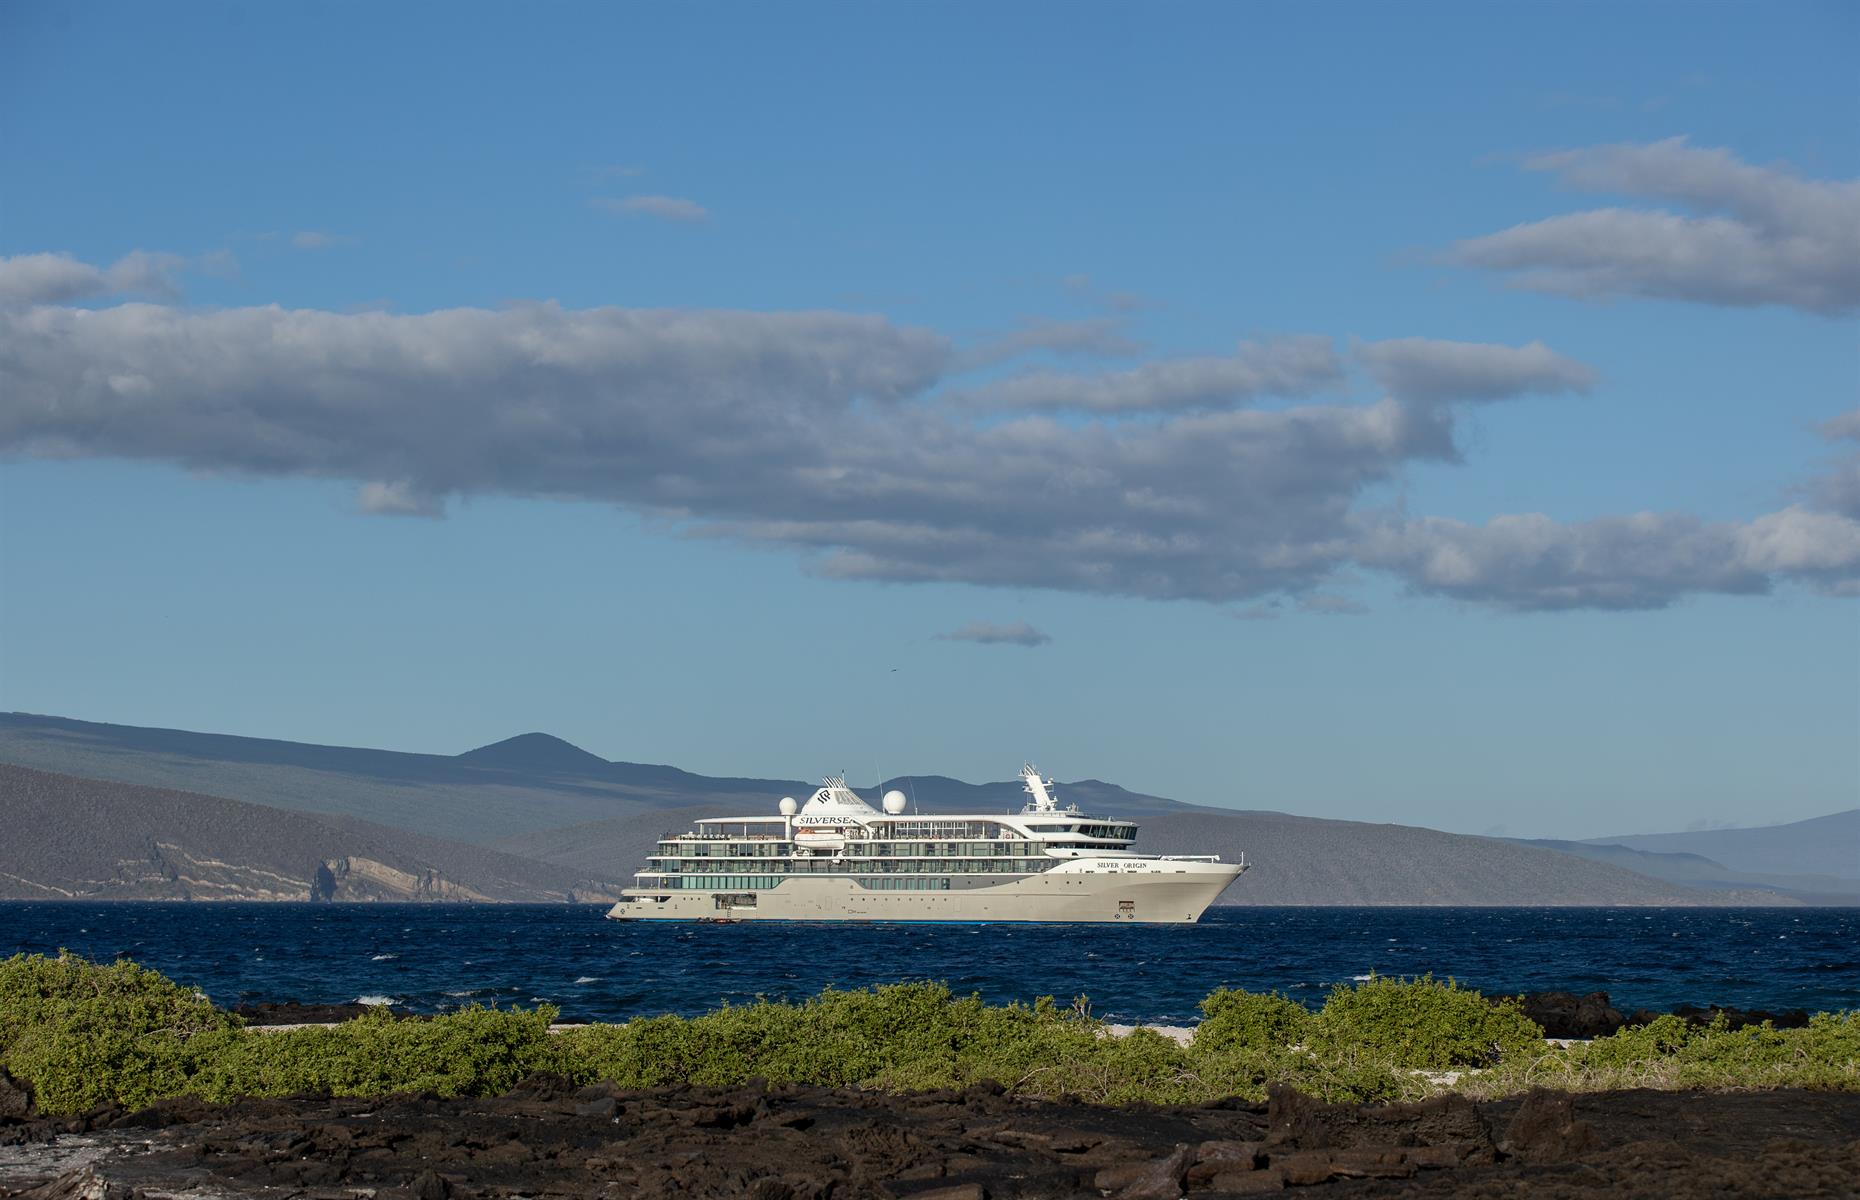 <p>In the Galapagos Islands, the best things really do come in small packages, and many lines have specially designed ships that only sail in this region. Look for custom-built vessels from Celebrity Cruises, Hurtigruten, G Adventures and Metropolitan Touring, or explore these isles in style with luxury line Silversea. Silver Origin takes its name from Darwin's ground-breaking theory, with a seven-day Galapagos Voyage from £7,000 ($8,881), packed with blue-footed boobies, marine iguanas and giant tortoises peeking out amid the lava-formed landscapes. </p>